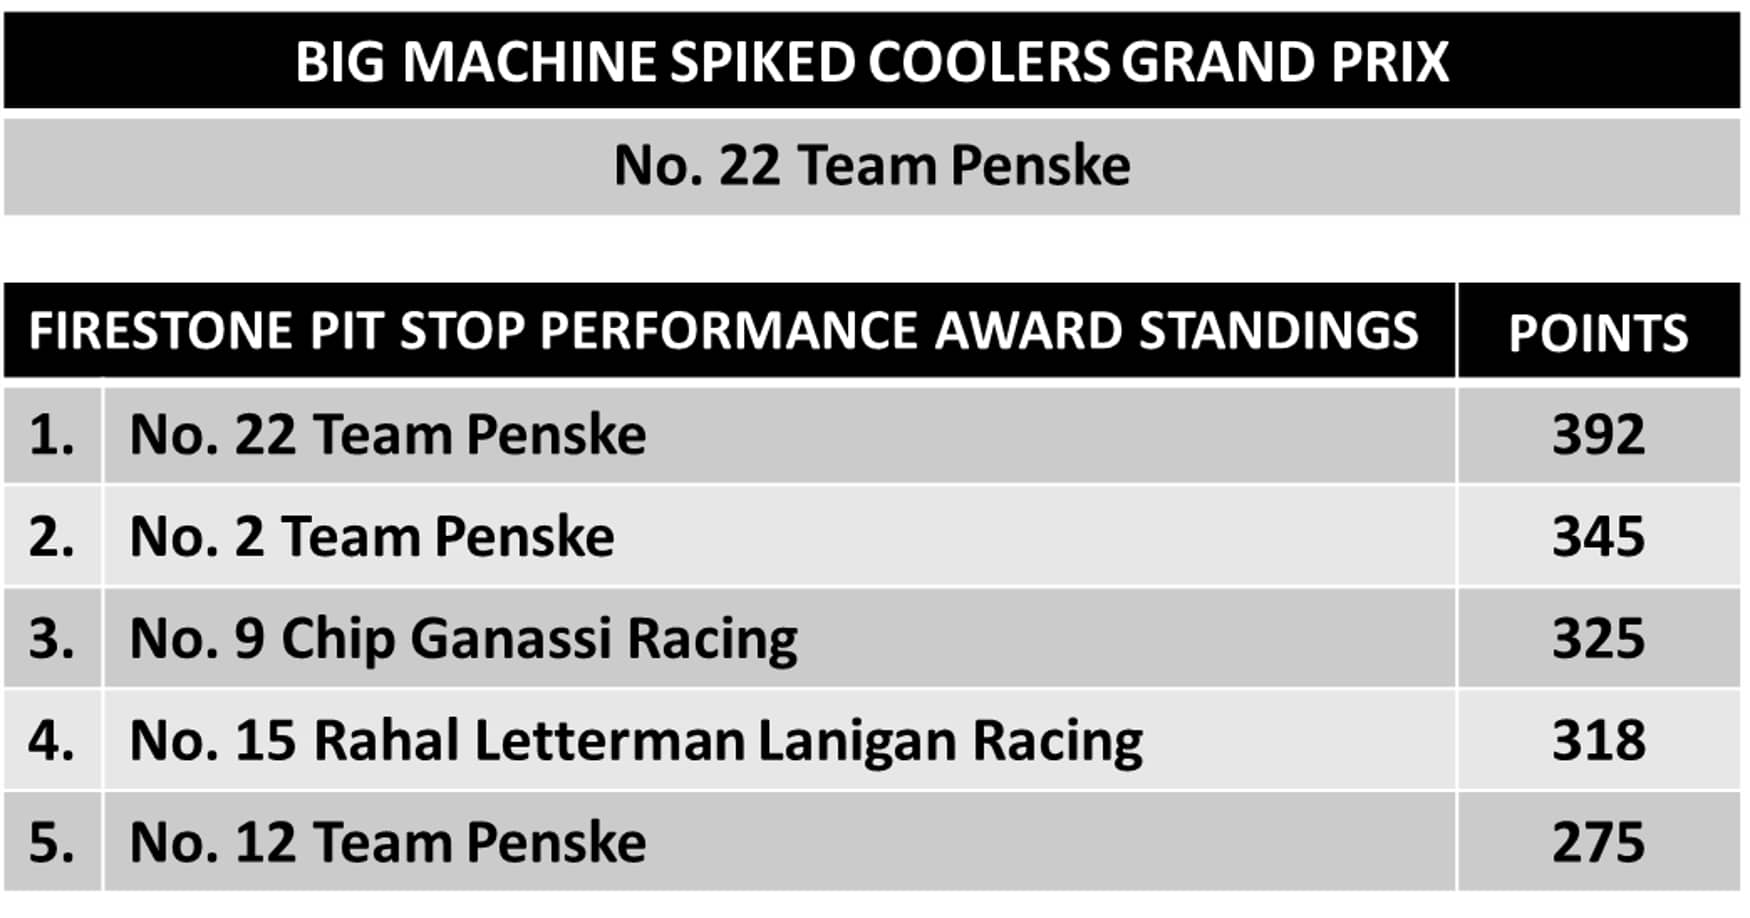 Table showing Big Machine Spiked Coolers Grand Prix point totals.